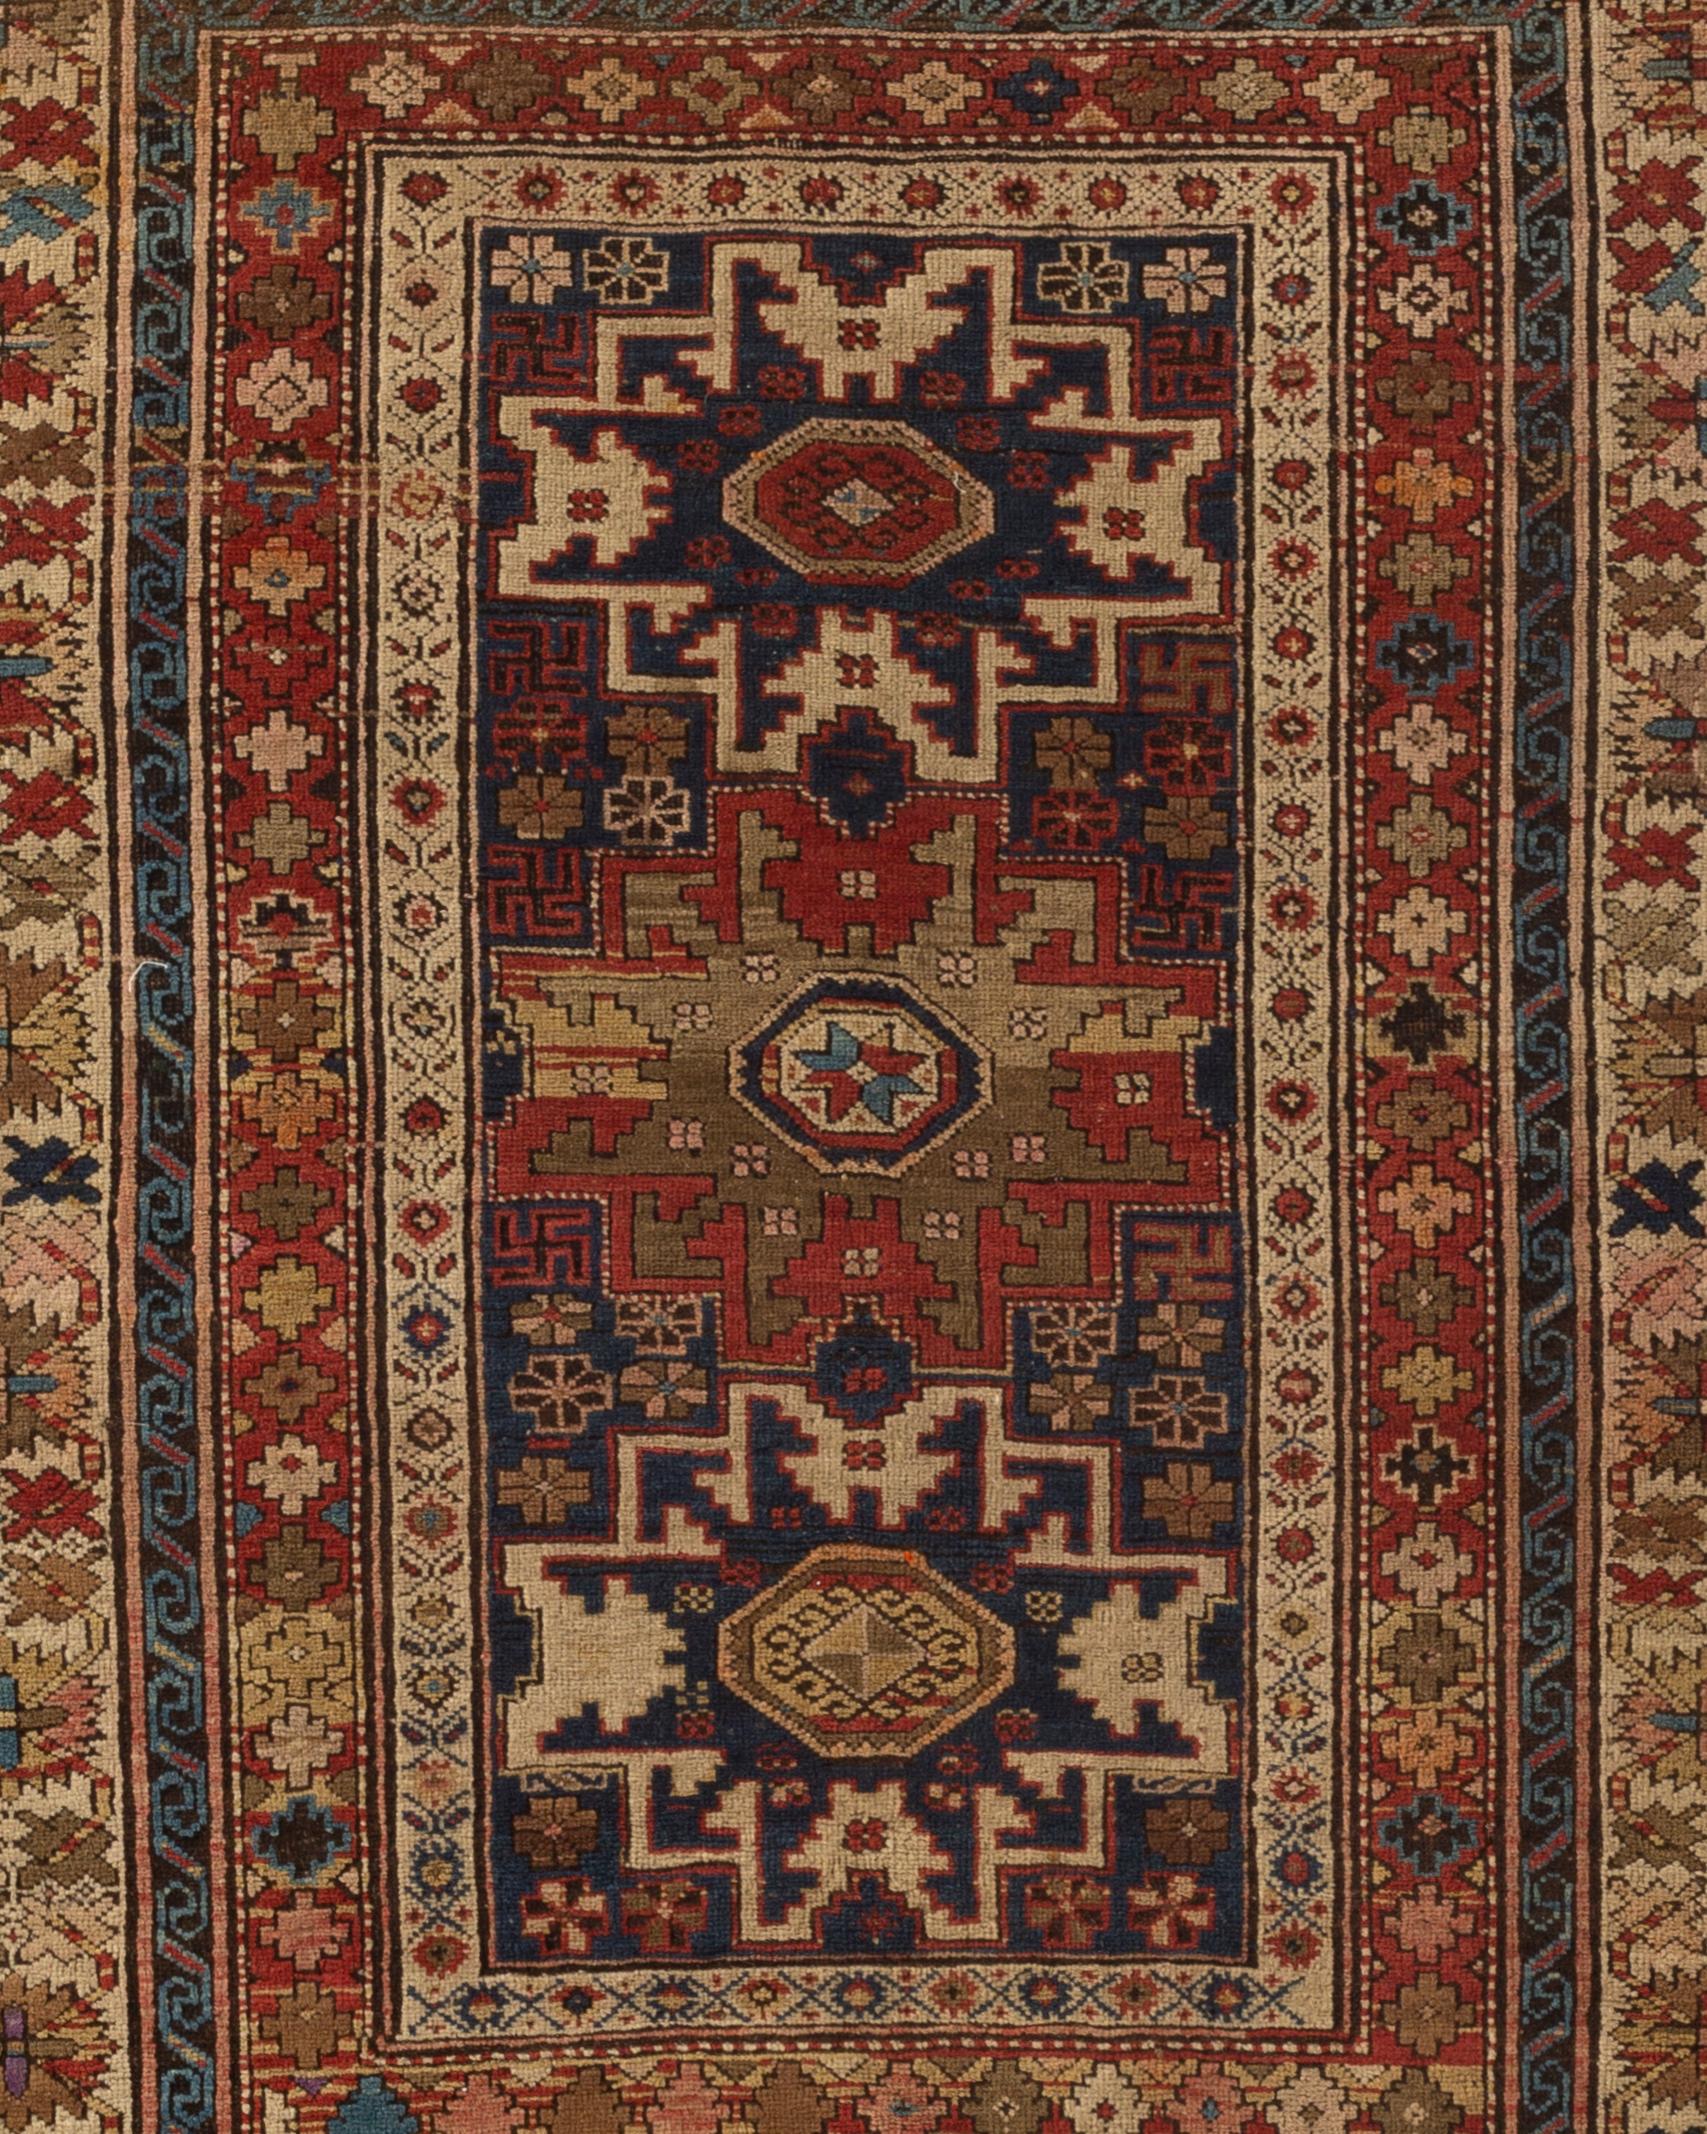 Antique Caucasian Lesghi Star rug, circa 1880, the central field with the two distinctive star motifs that are the signature element in rugs from this area surrounded by ethnic symbols and designs completed by multiple borders that set the frame for